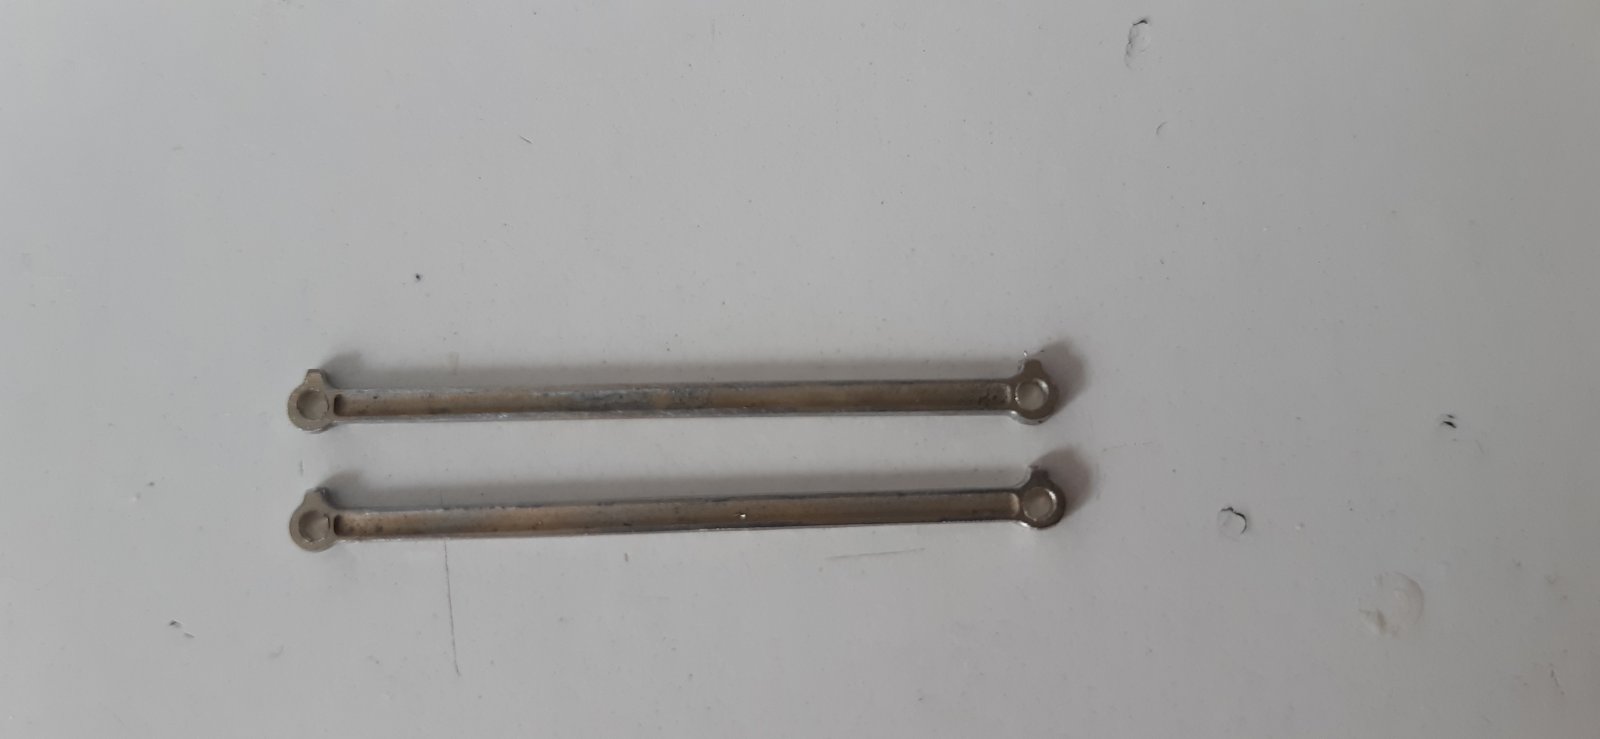 S coupling rods drilled out to 1.5mm bores for crankpins